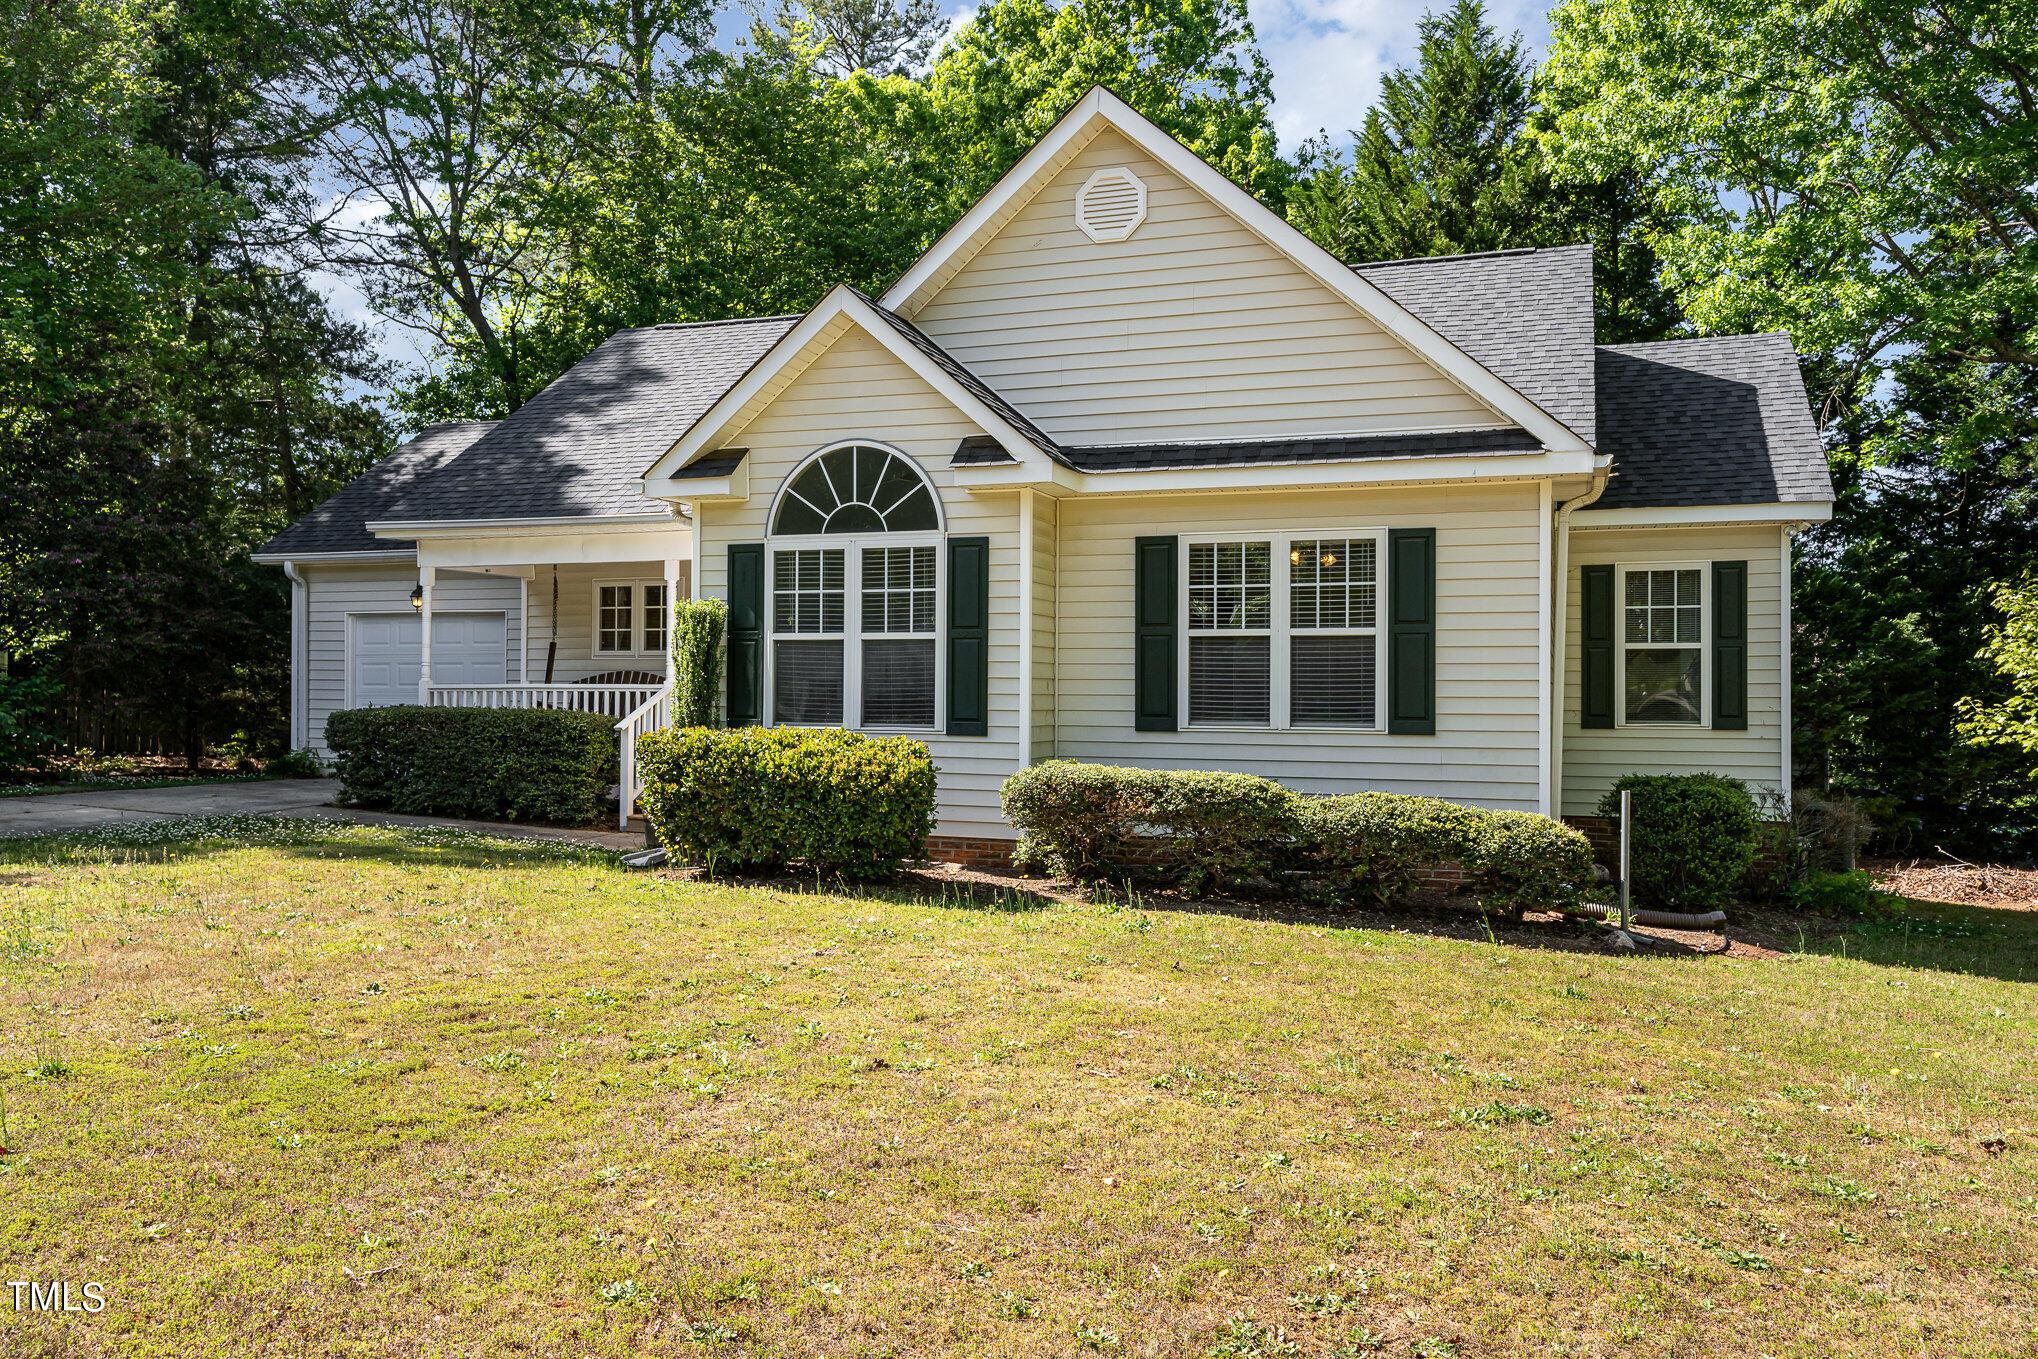 Photo one of 105 Damask Rose Dr Holly Springs NC 27540 | MLS 10015647